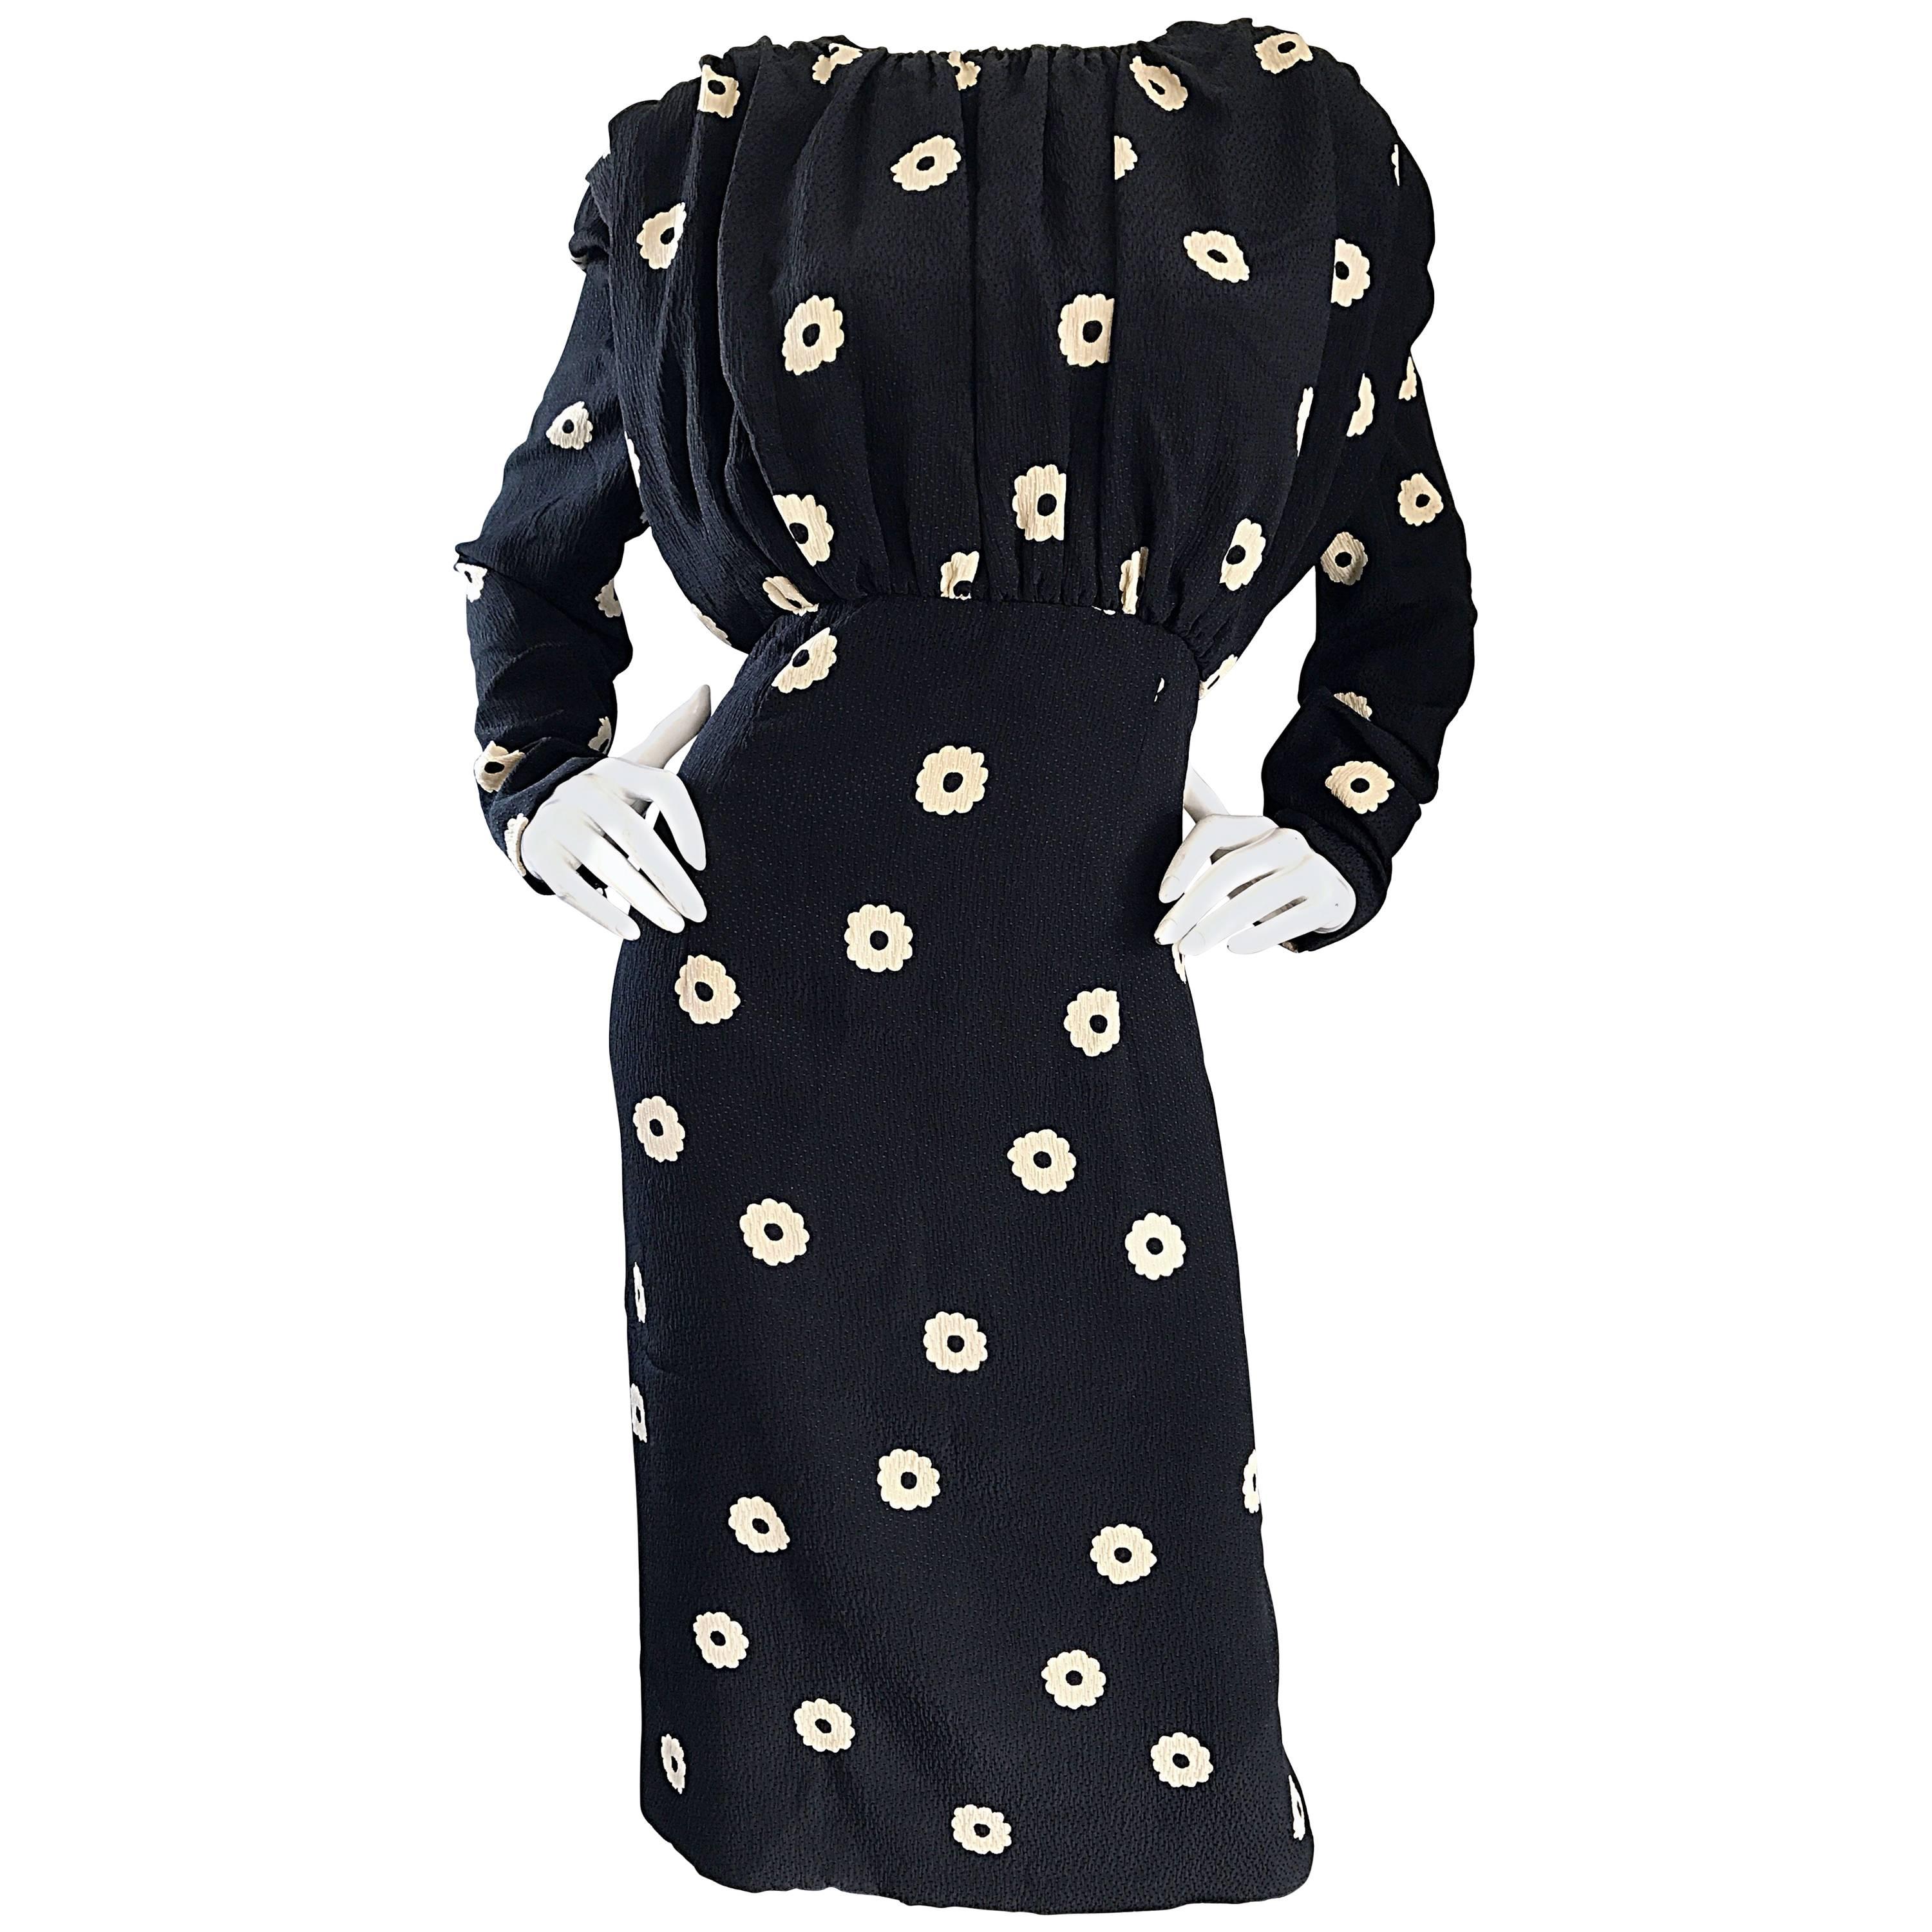 Pauline Trigere For Neiman Marcus Larger Size Vintage Black and White Silk Dress